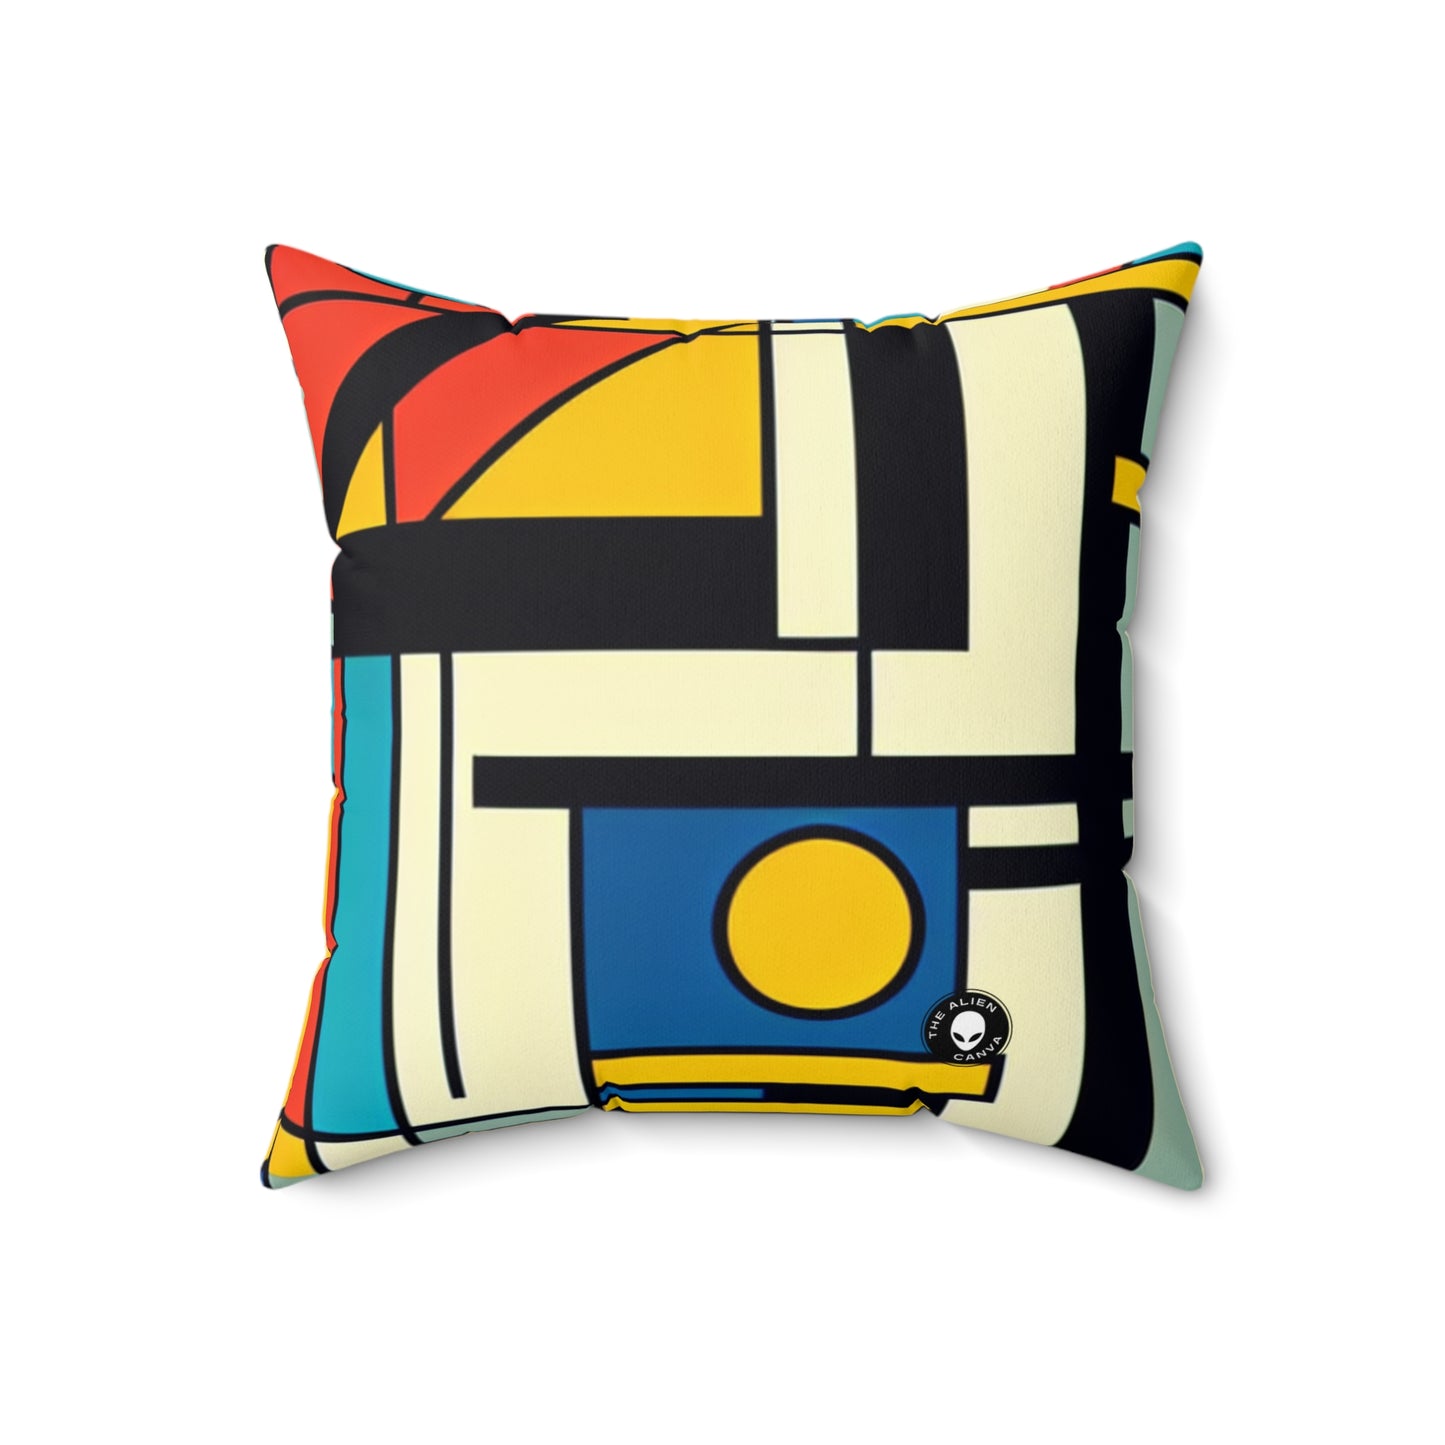 "Harmonious Balance: Neoplastic Exploration in Black, White, and Primary Colors"- The Alien Spun Polyester Square Pillow Neoplasticism